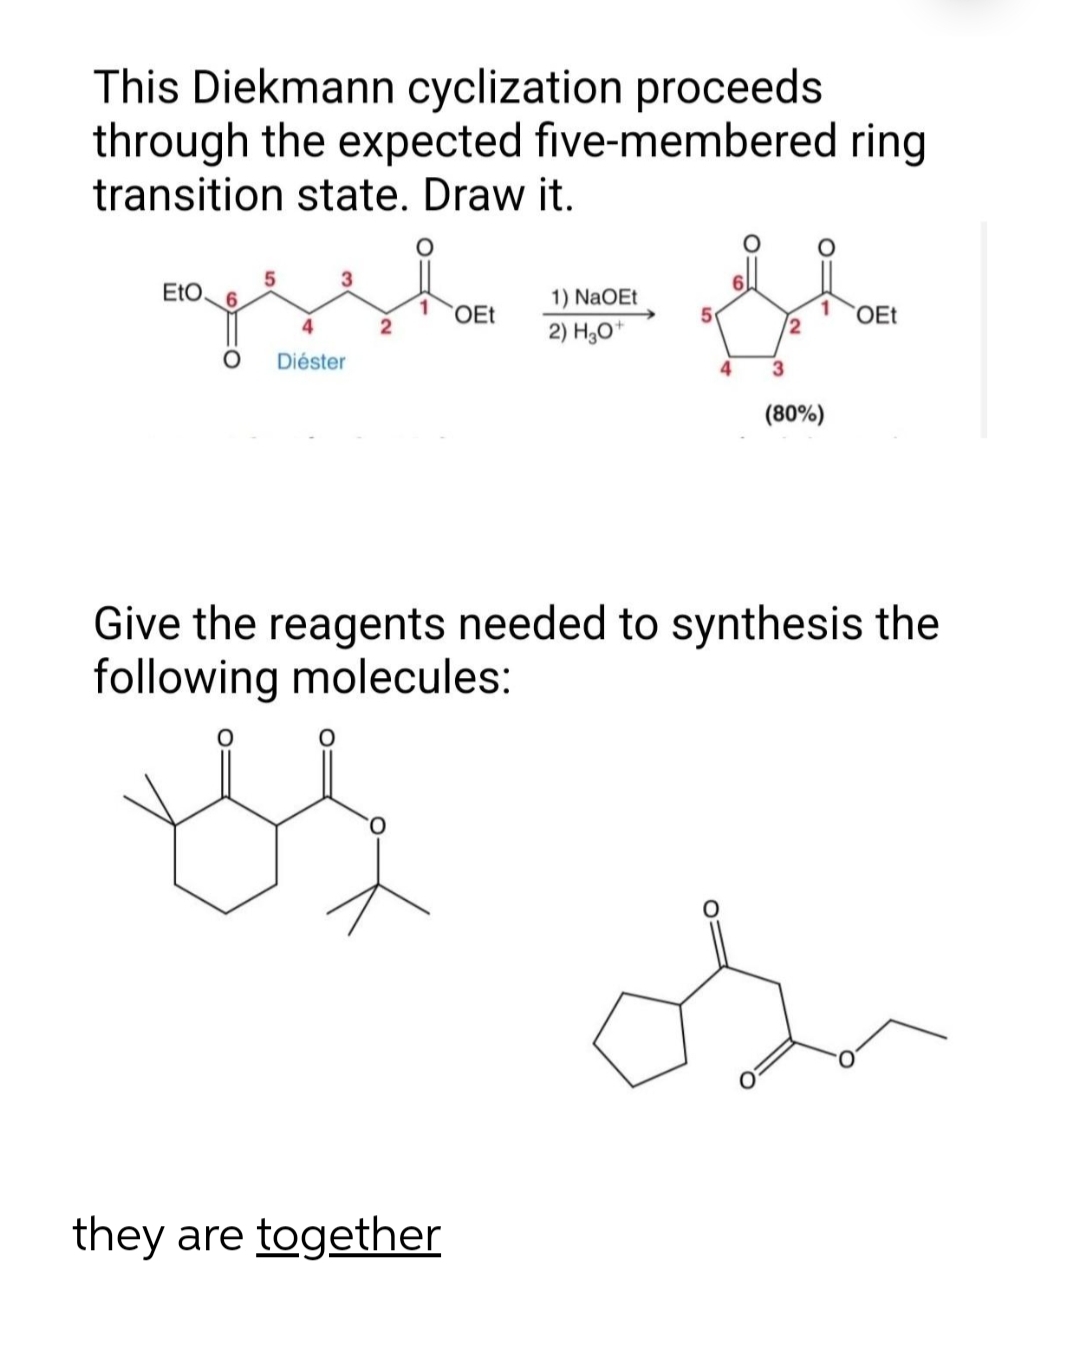 This Diekmann cyclization proceeds
through the expected five-membered ring
transition state. Draw it.
3
EtO.
6.
1) NaOEt
OEt
1
2
OEt
4
2) H,0*
Diéster
4
3
(80%)
Give the reagents needed to synthesis the
following molecules:
they are together
